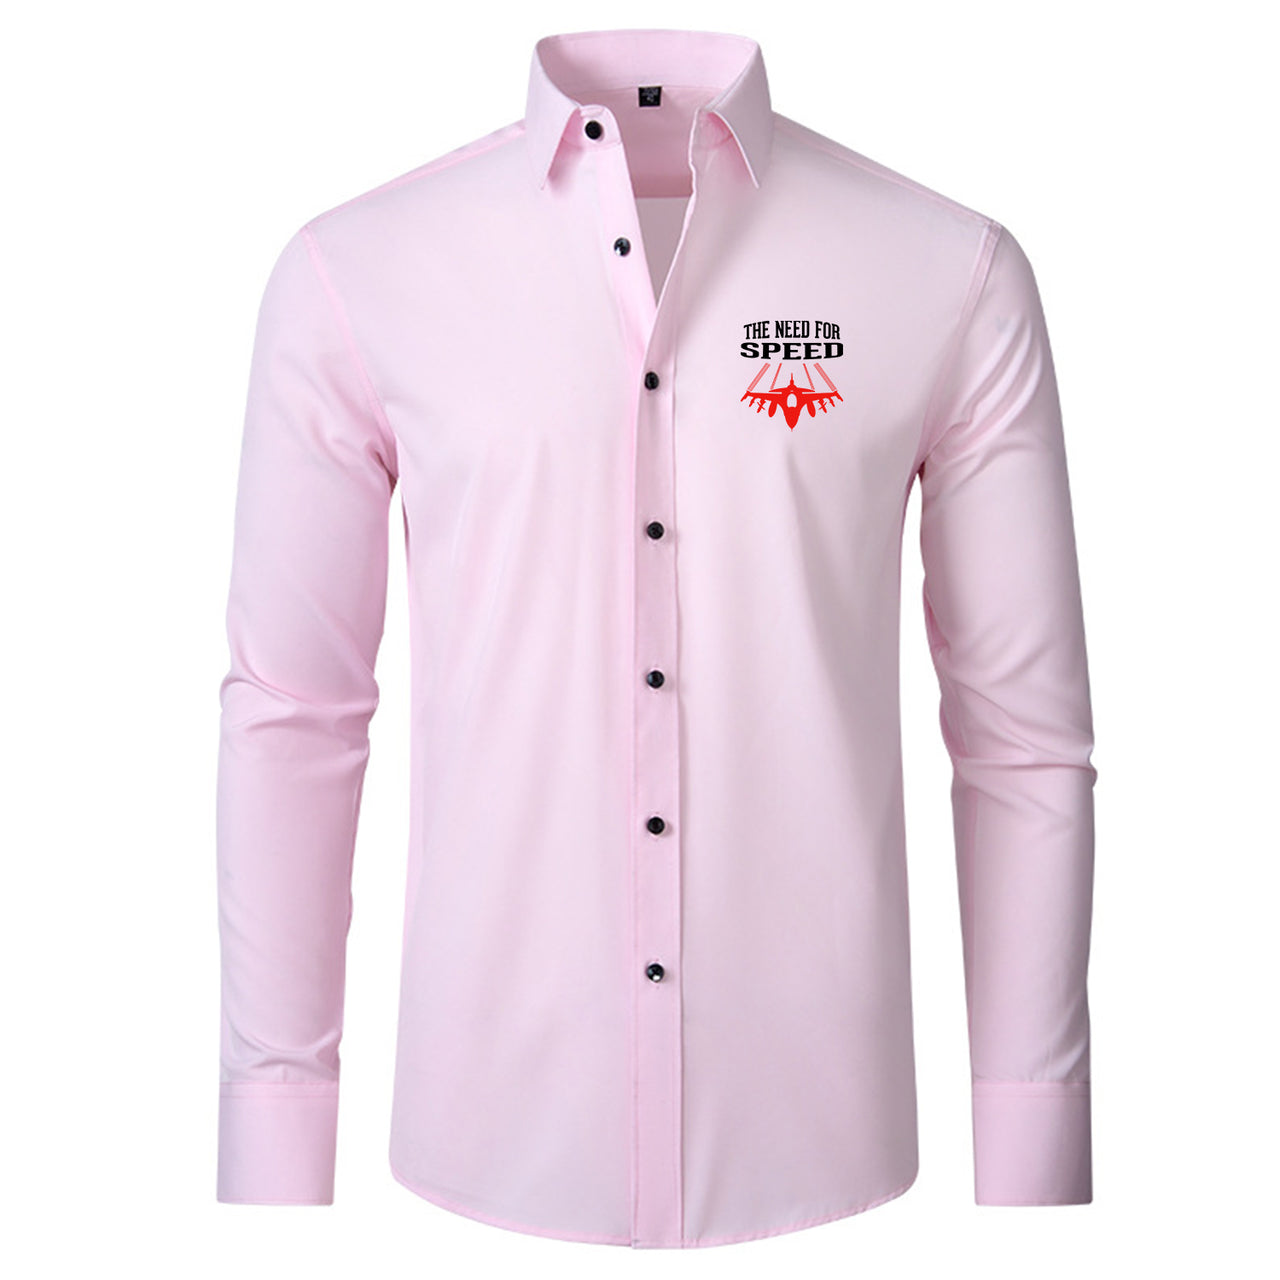 The Need For Speed Designed Long Sleeve Shirts